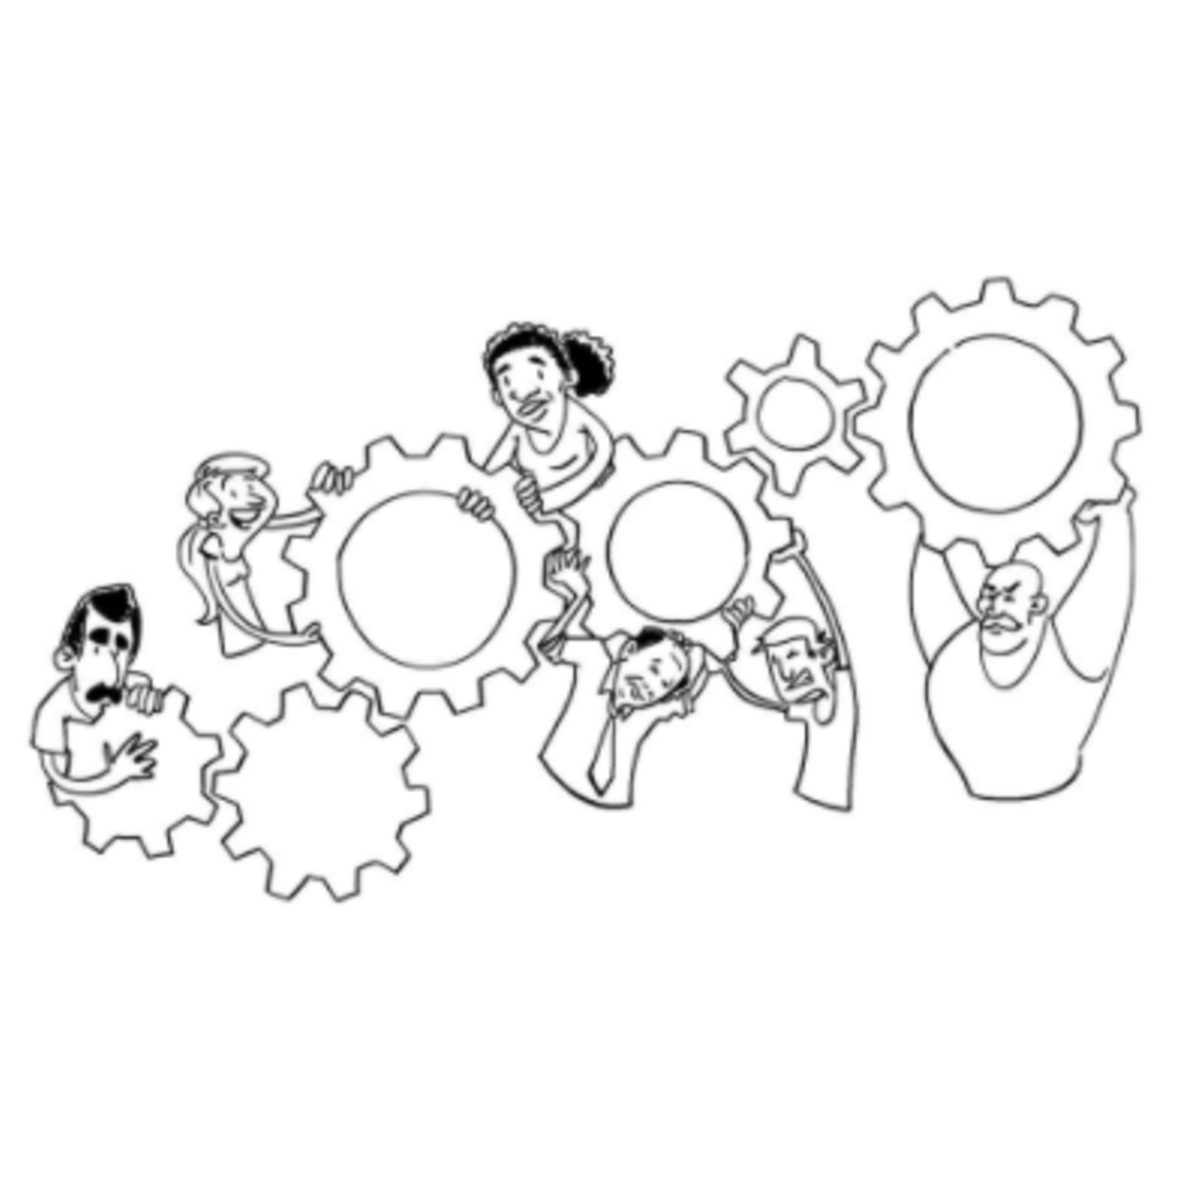 People teamwork hand drawn sketch icon Royalty Free Vector